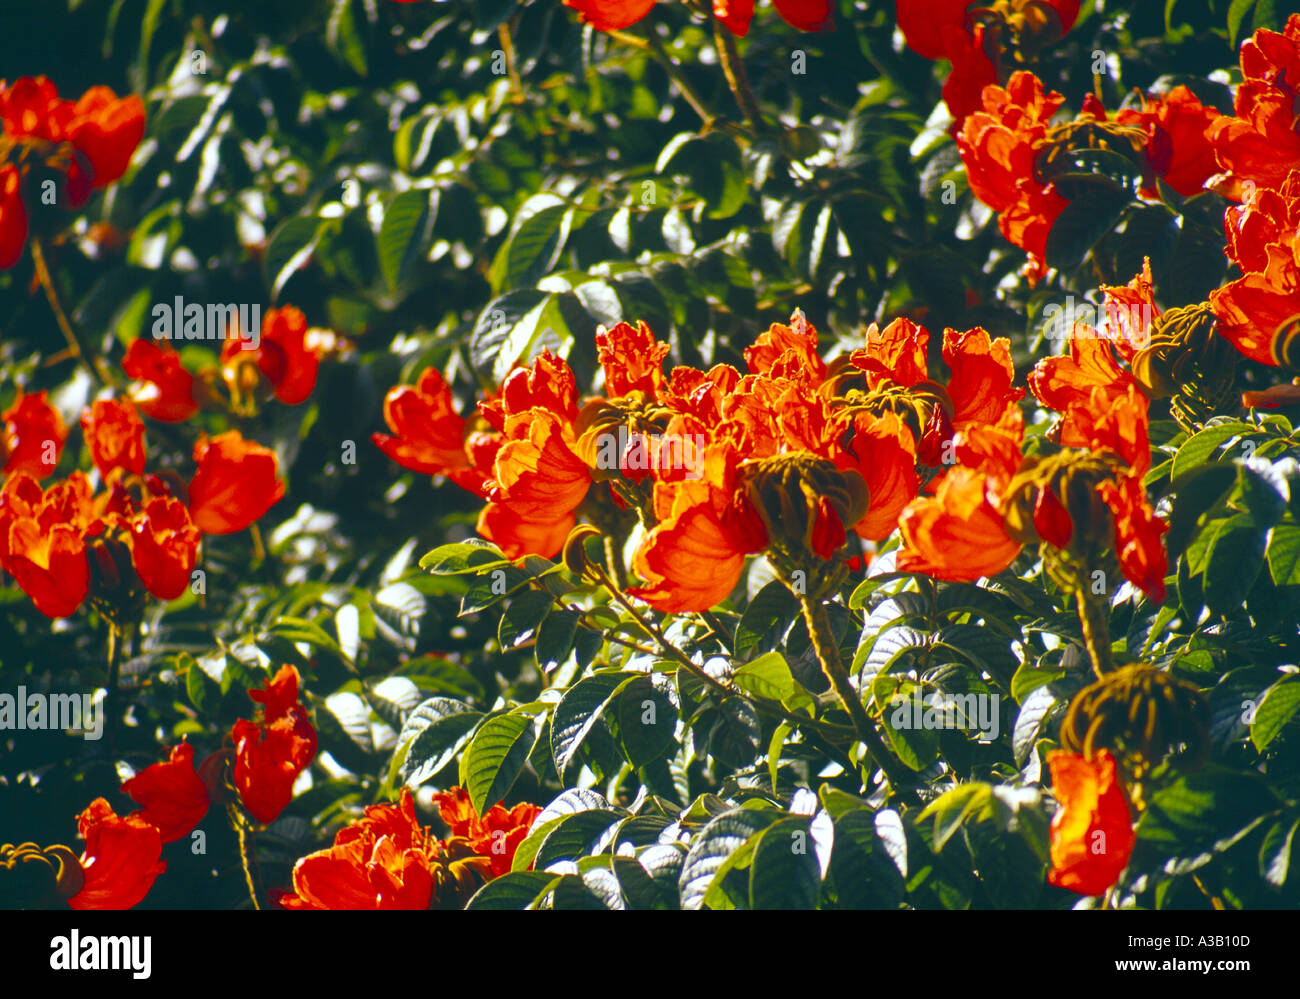 African Tulip Tree Flower Banque D'Images